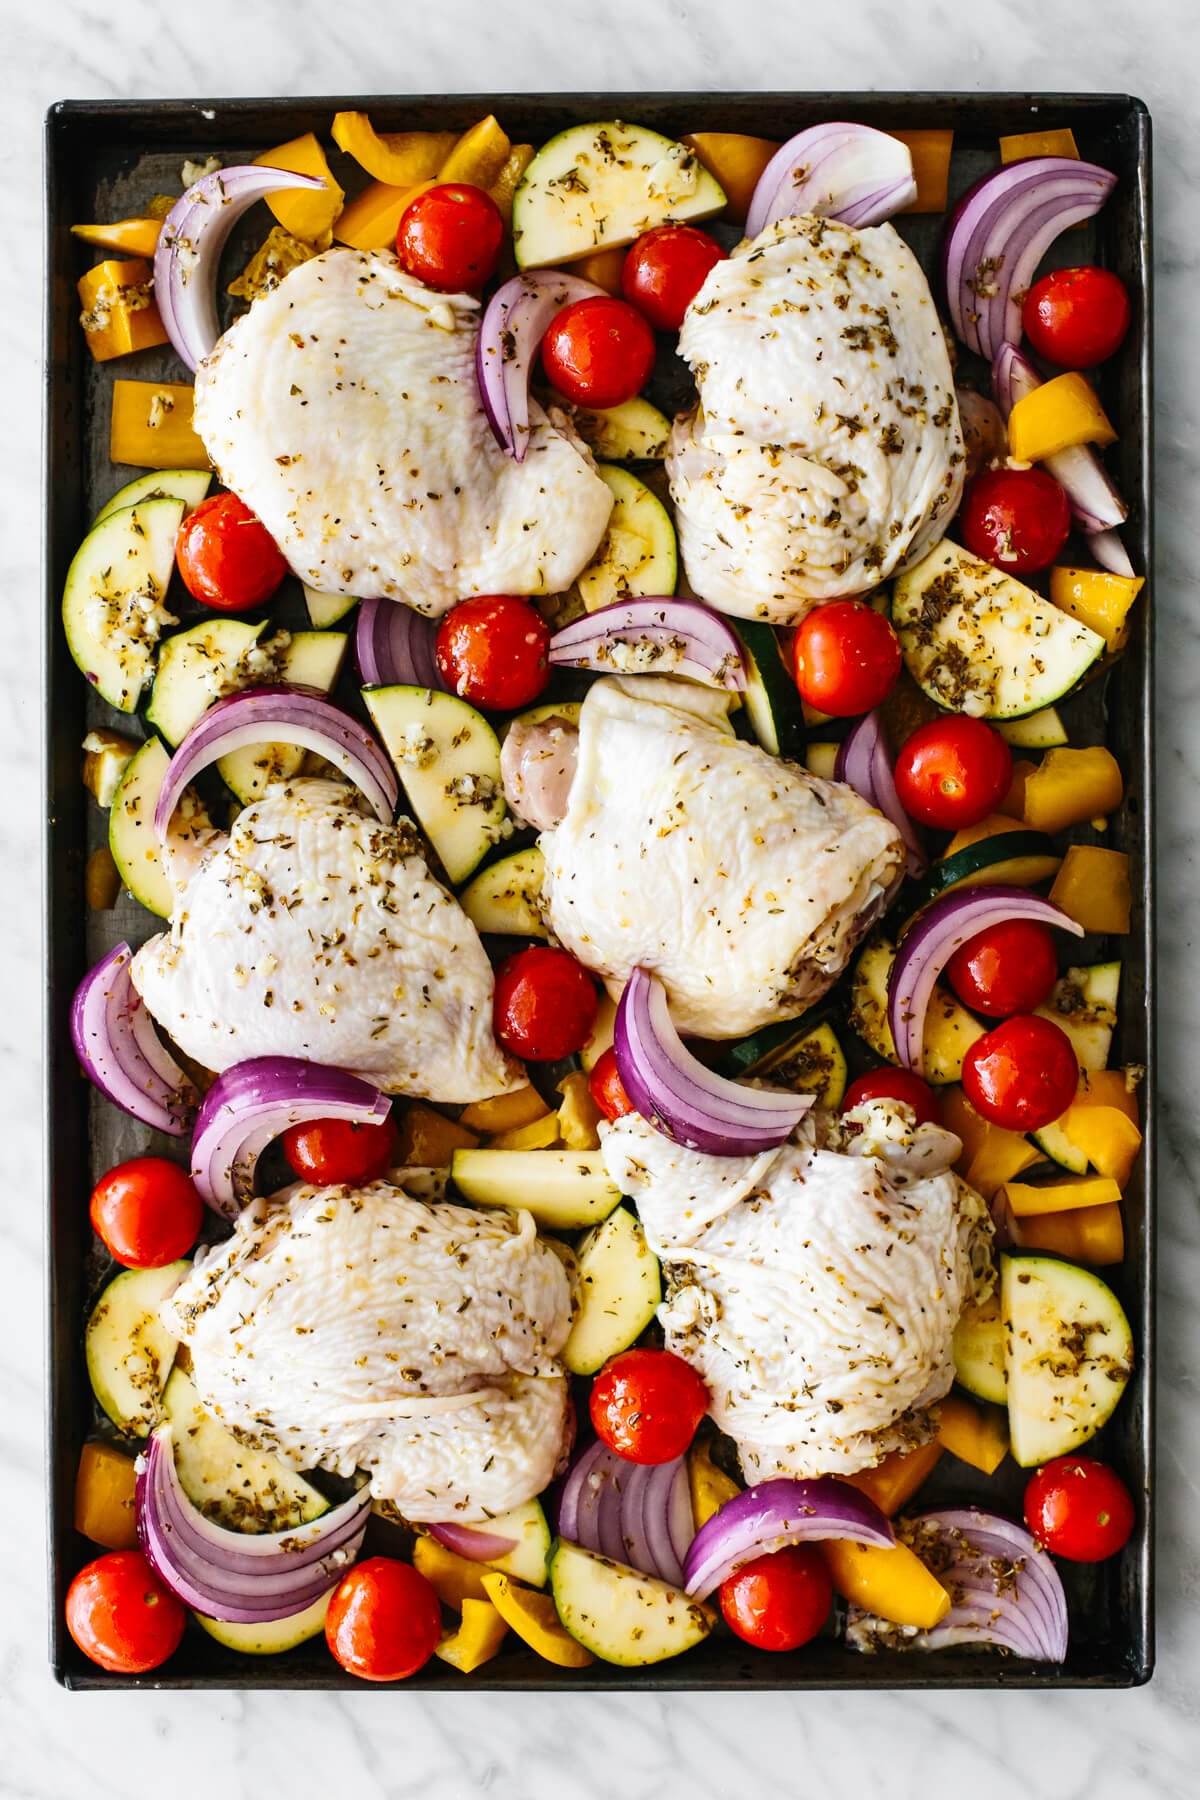 Raw chicken and vegetables on a sheet pan.